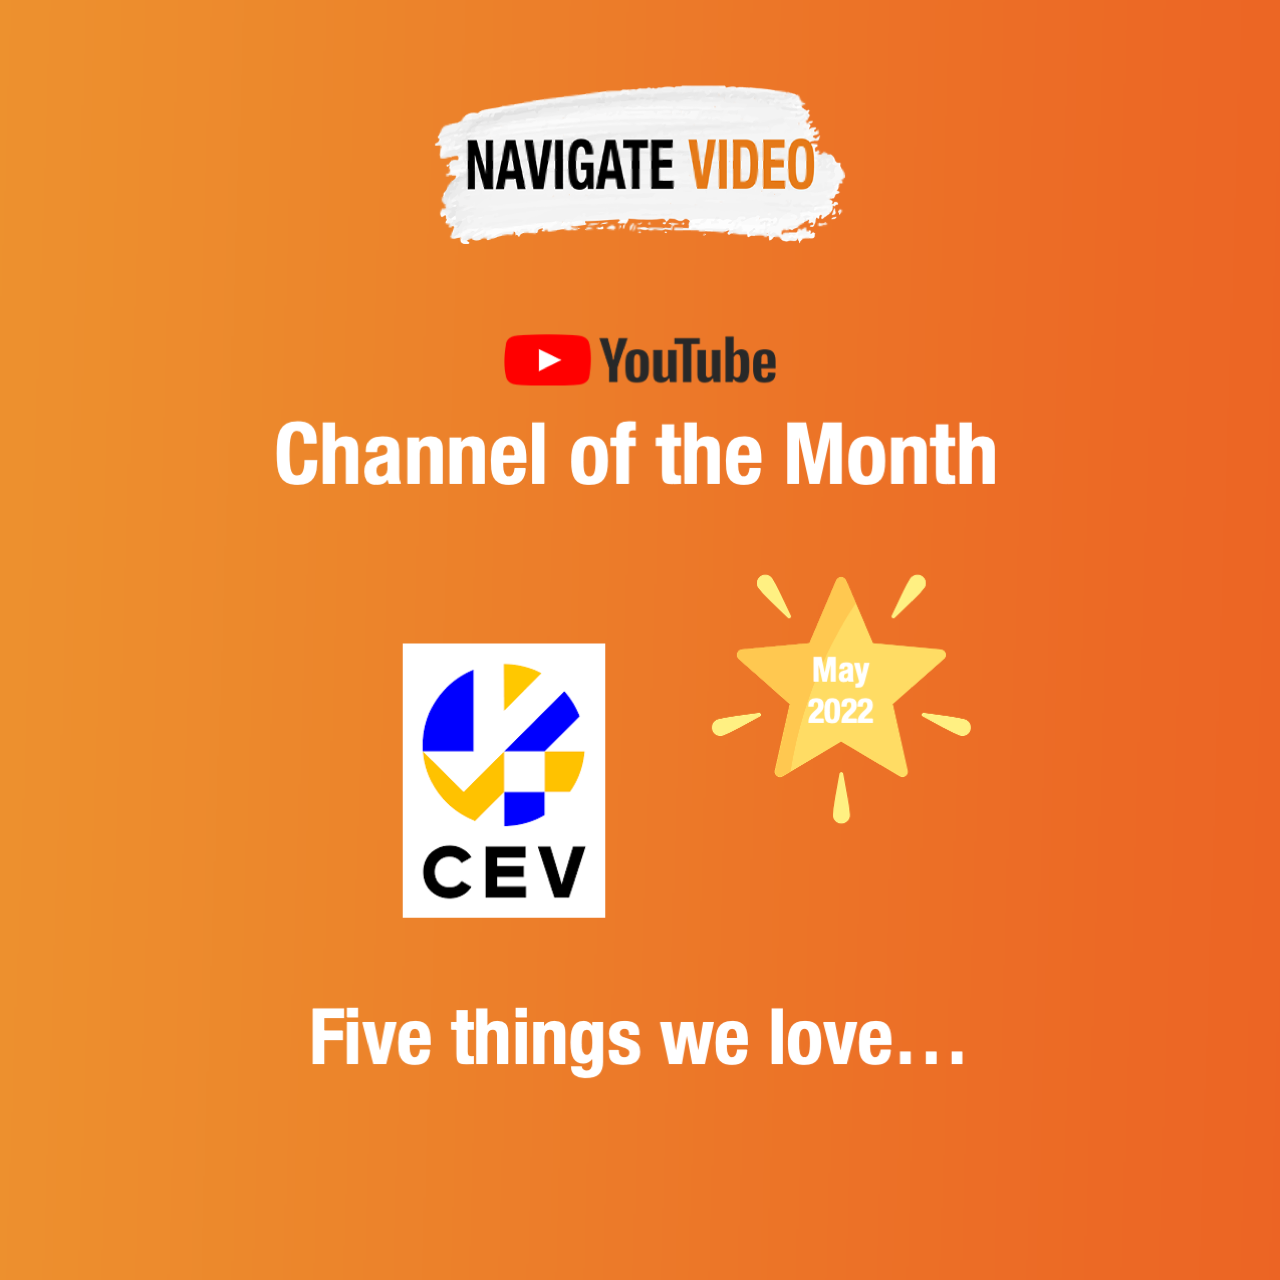 YouTube Channel of the Month